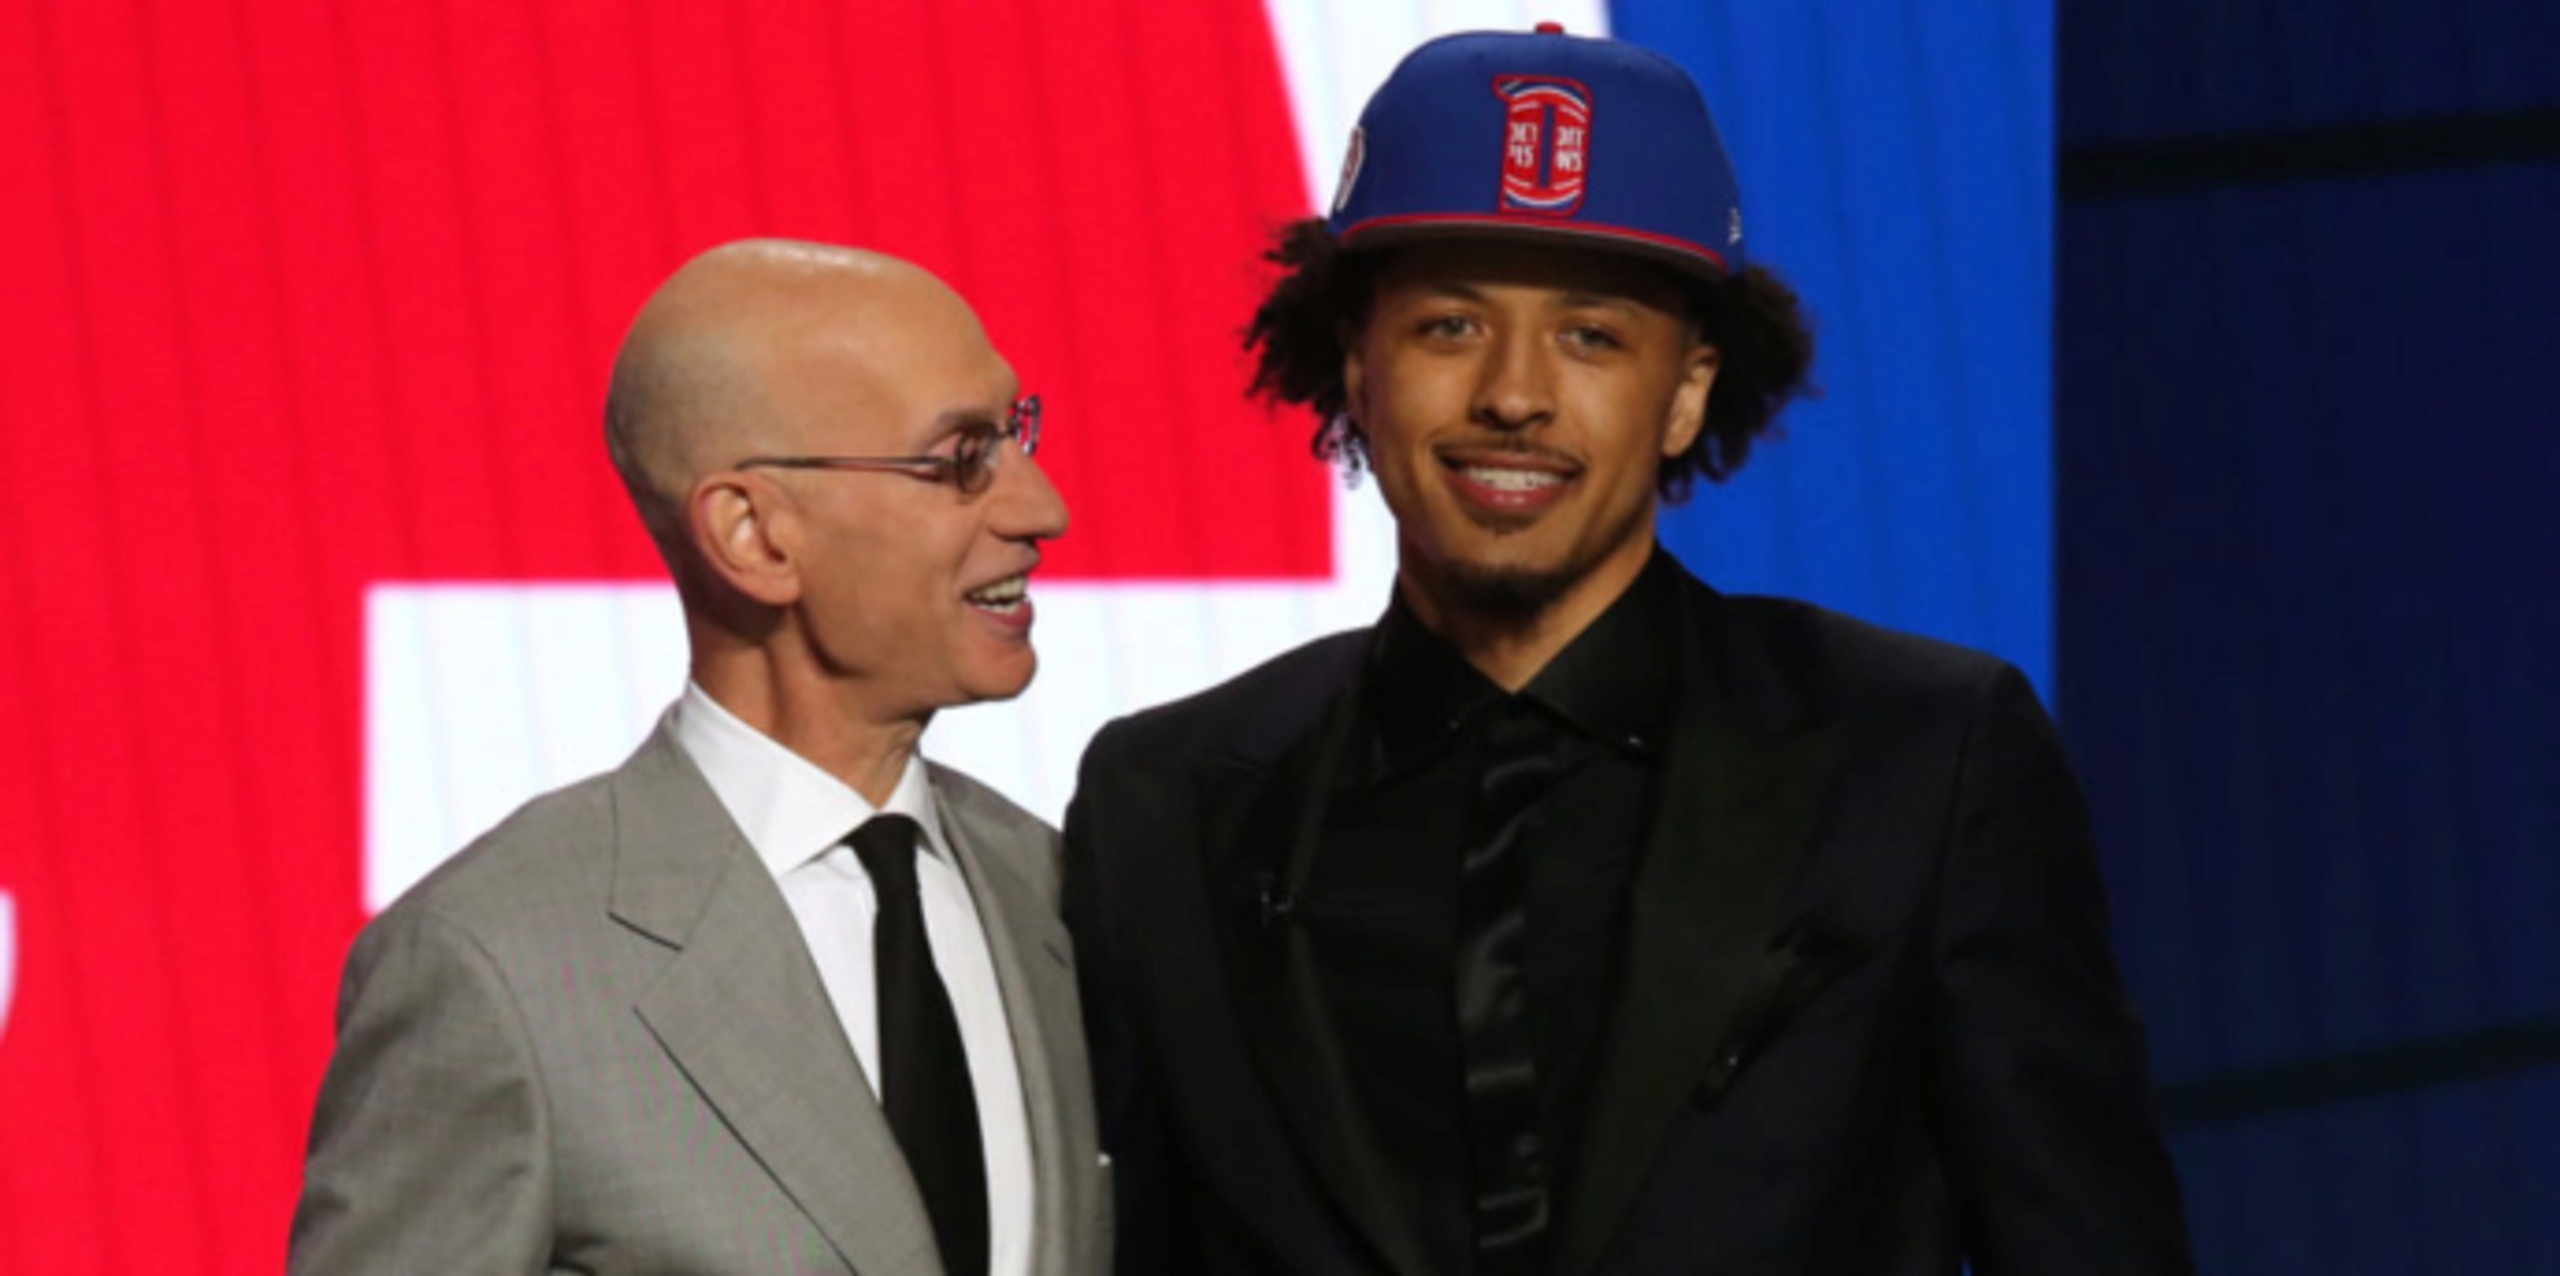 2021 NBA Draft: Analyzing how Cade Cunningham fits with the Pistons